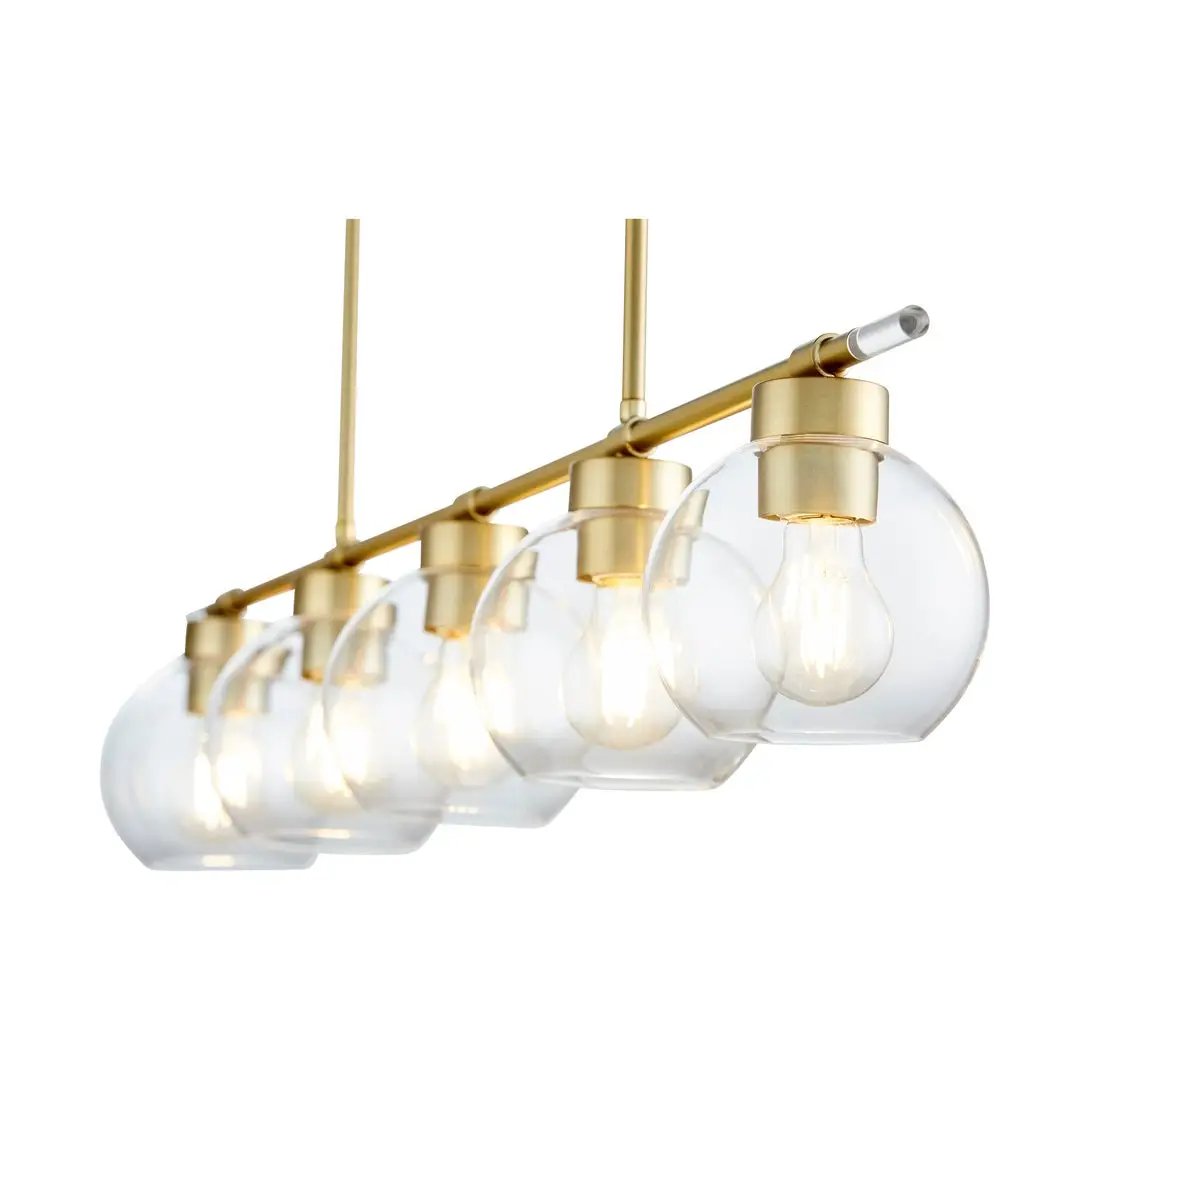 Transitional Linear Chandelier with clear glass globes and aged brass finish, 5 bulbs, 100W, UL Listed, Damp Location, 6"W x 7.25"H x 41"L.